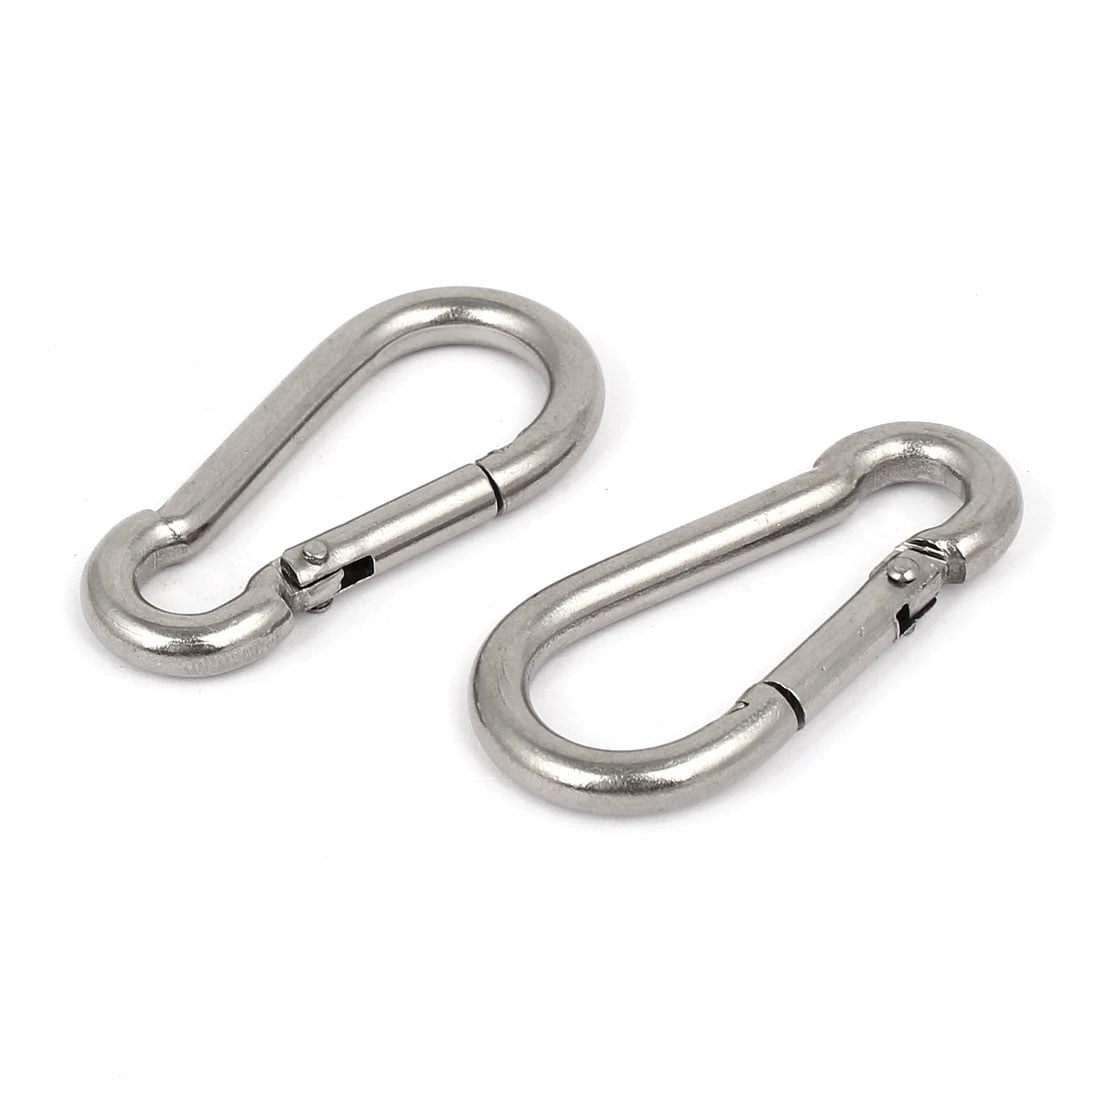 Uxcell M5 x 50mm 304 Stainless Steel Carabiner Spring Snap Link